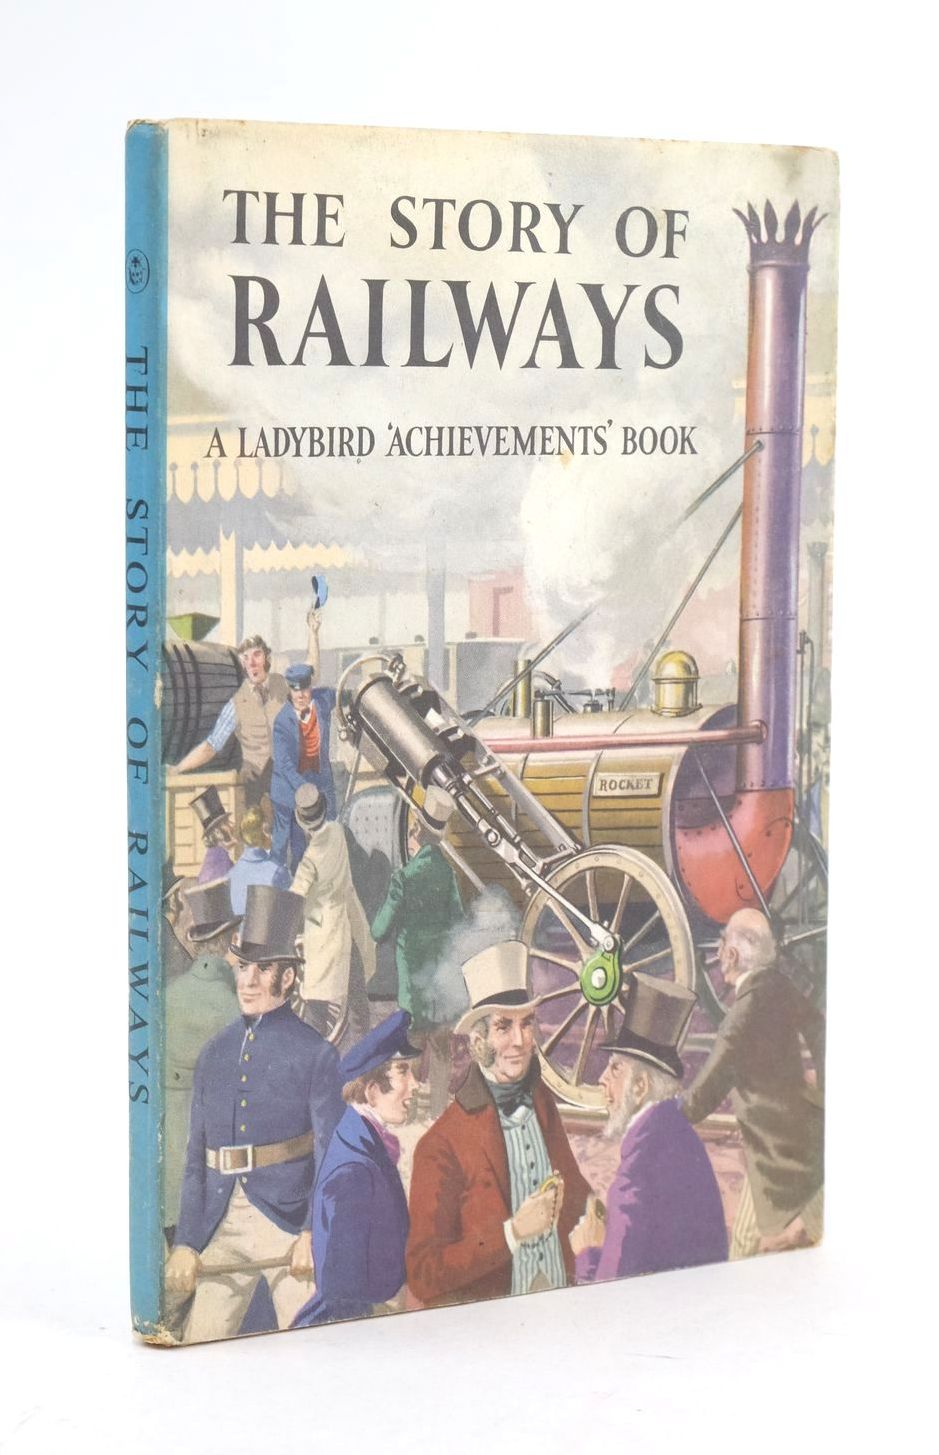 Photo of THE STORY OF RAILWAYS written by Bowood, Richard illustrated by Ayton, Robert published by Wills &amp; Hepworth Ltd. (STOCK CODE: 1324668)  for sale by Stella & Rose's Books